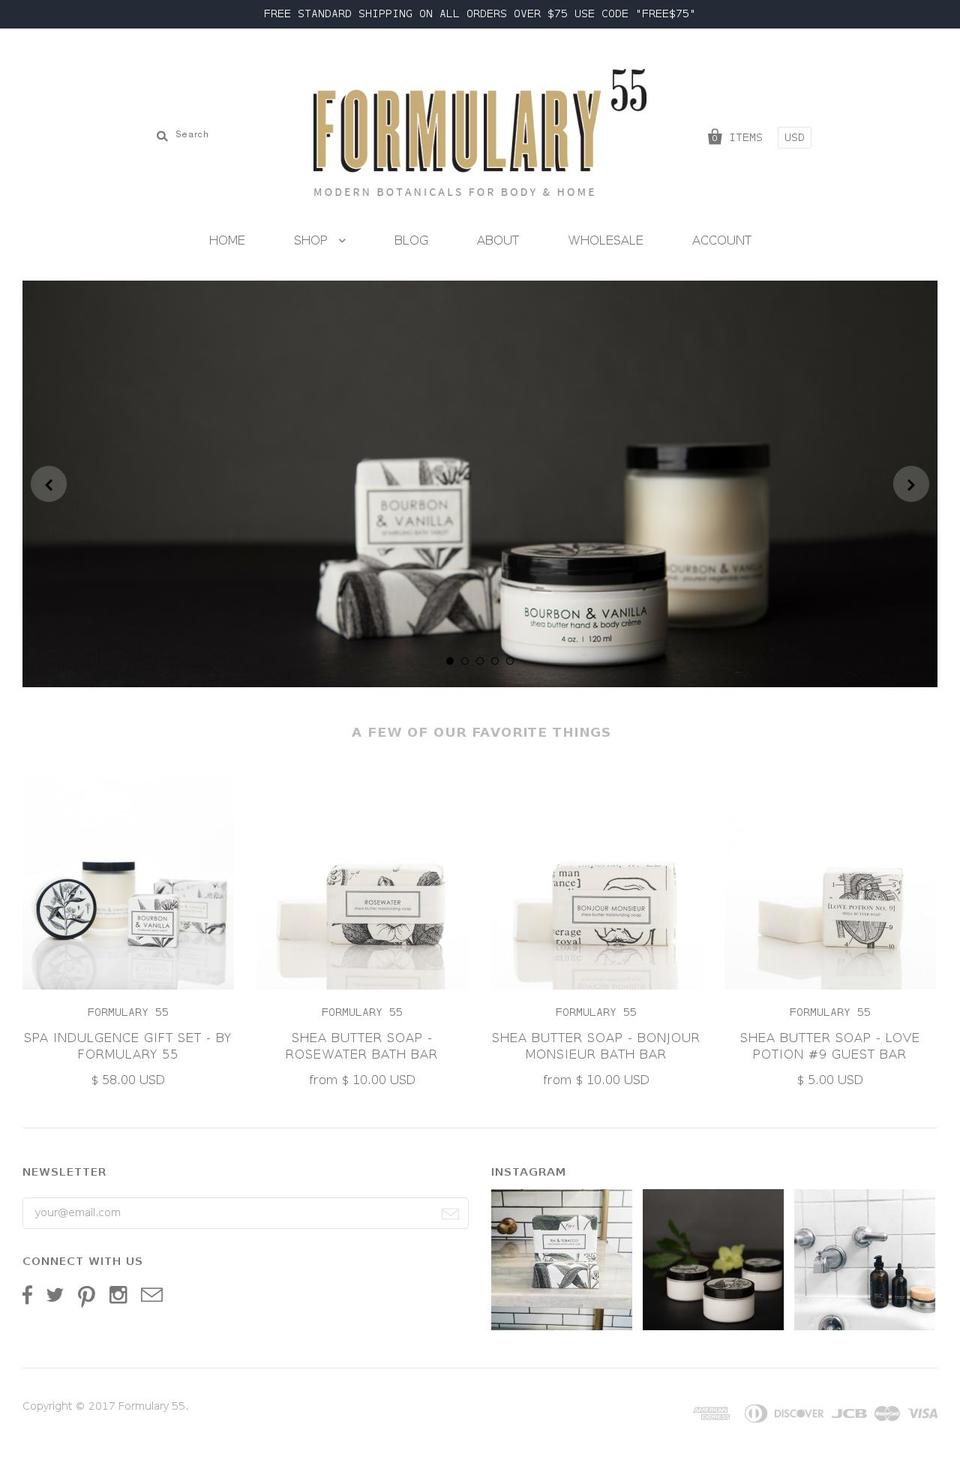 Pacific Shopify theme site example formulary55.com